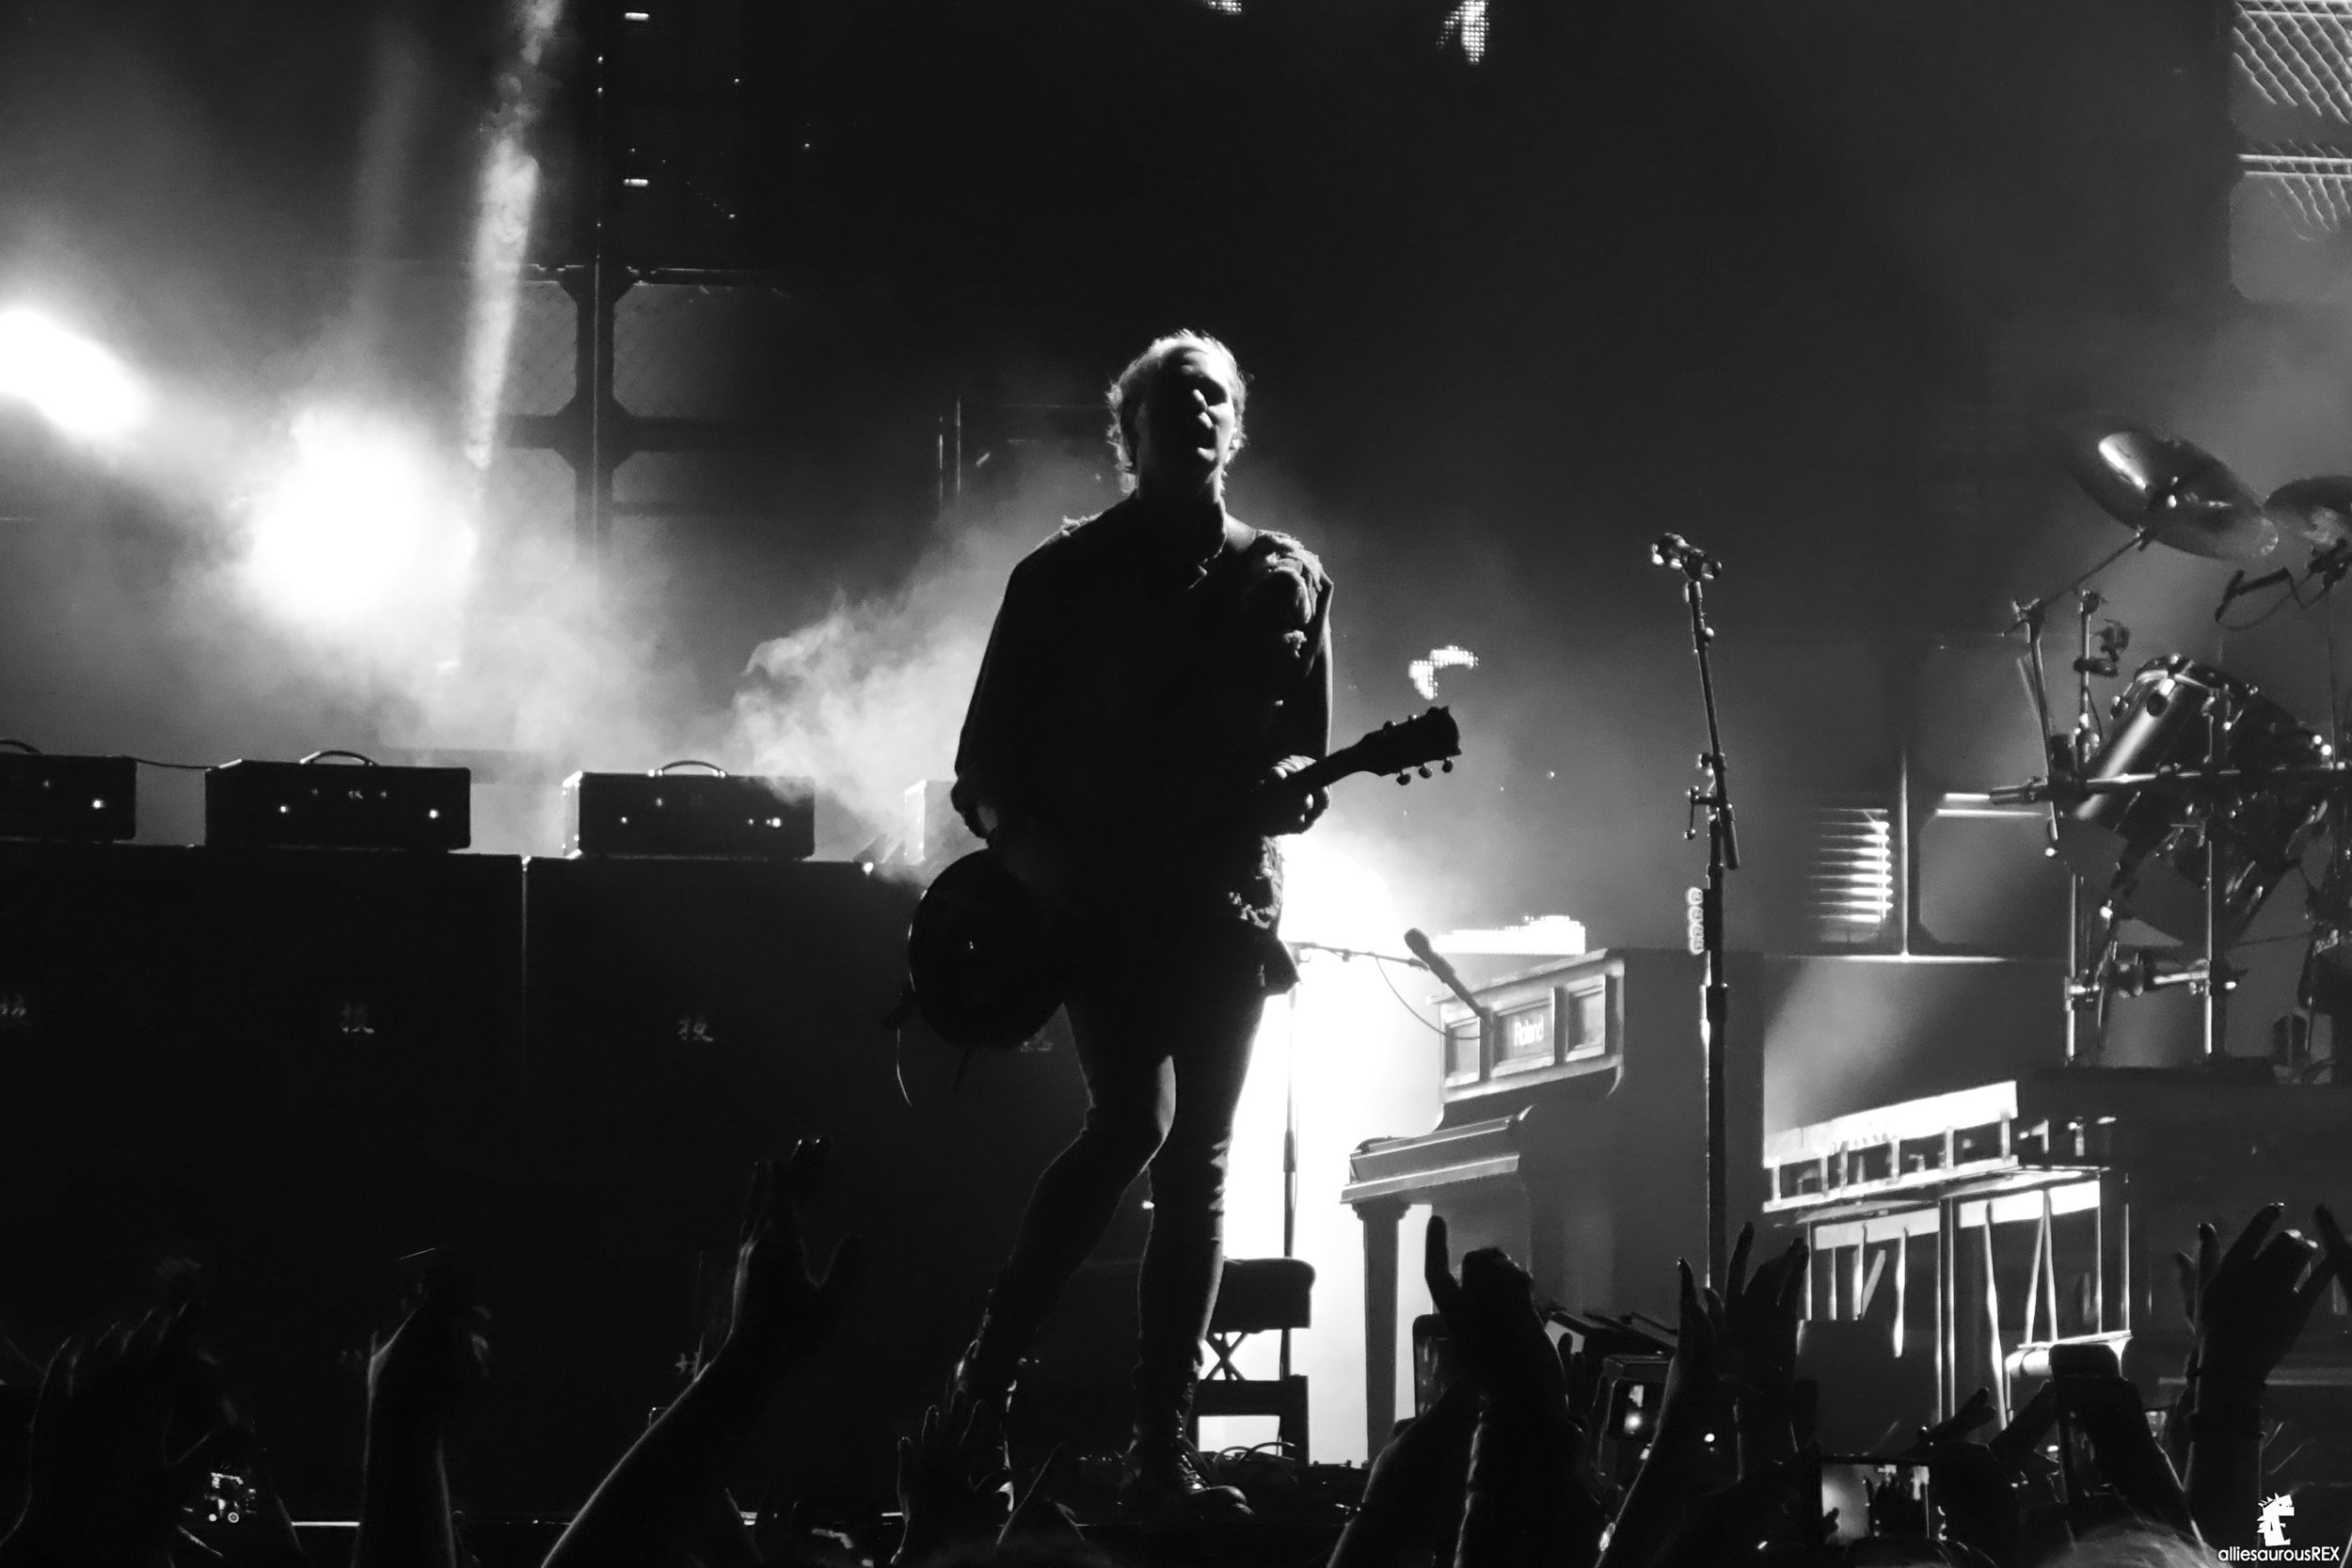  Michael Clifford of 5 Seconds of Summer at The Forum 